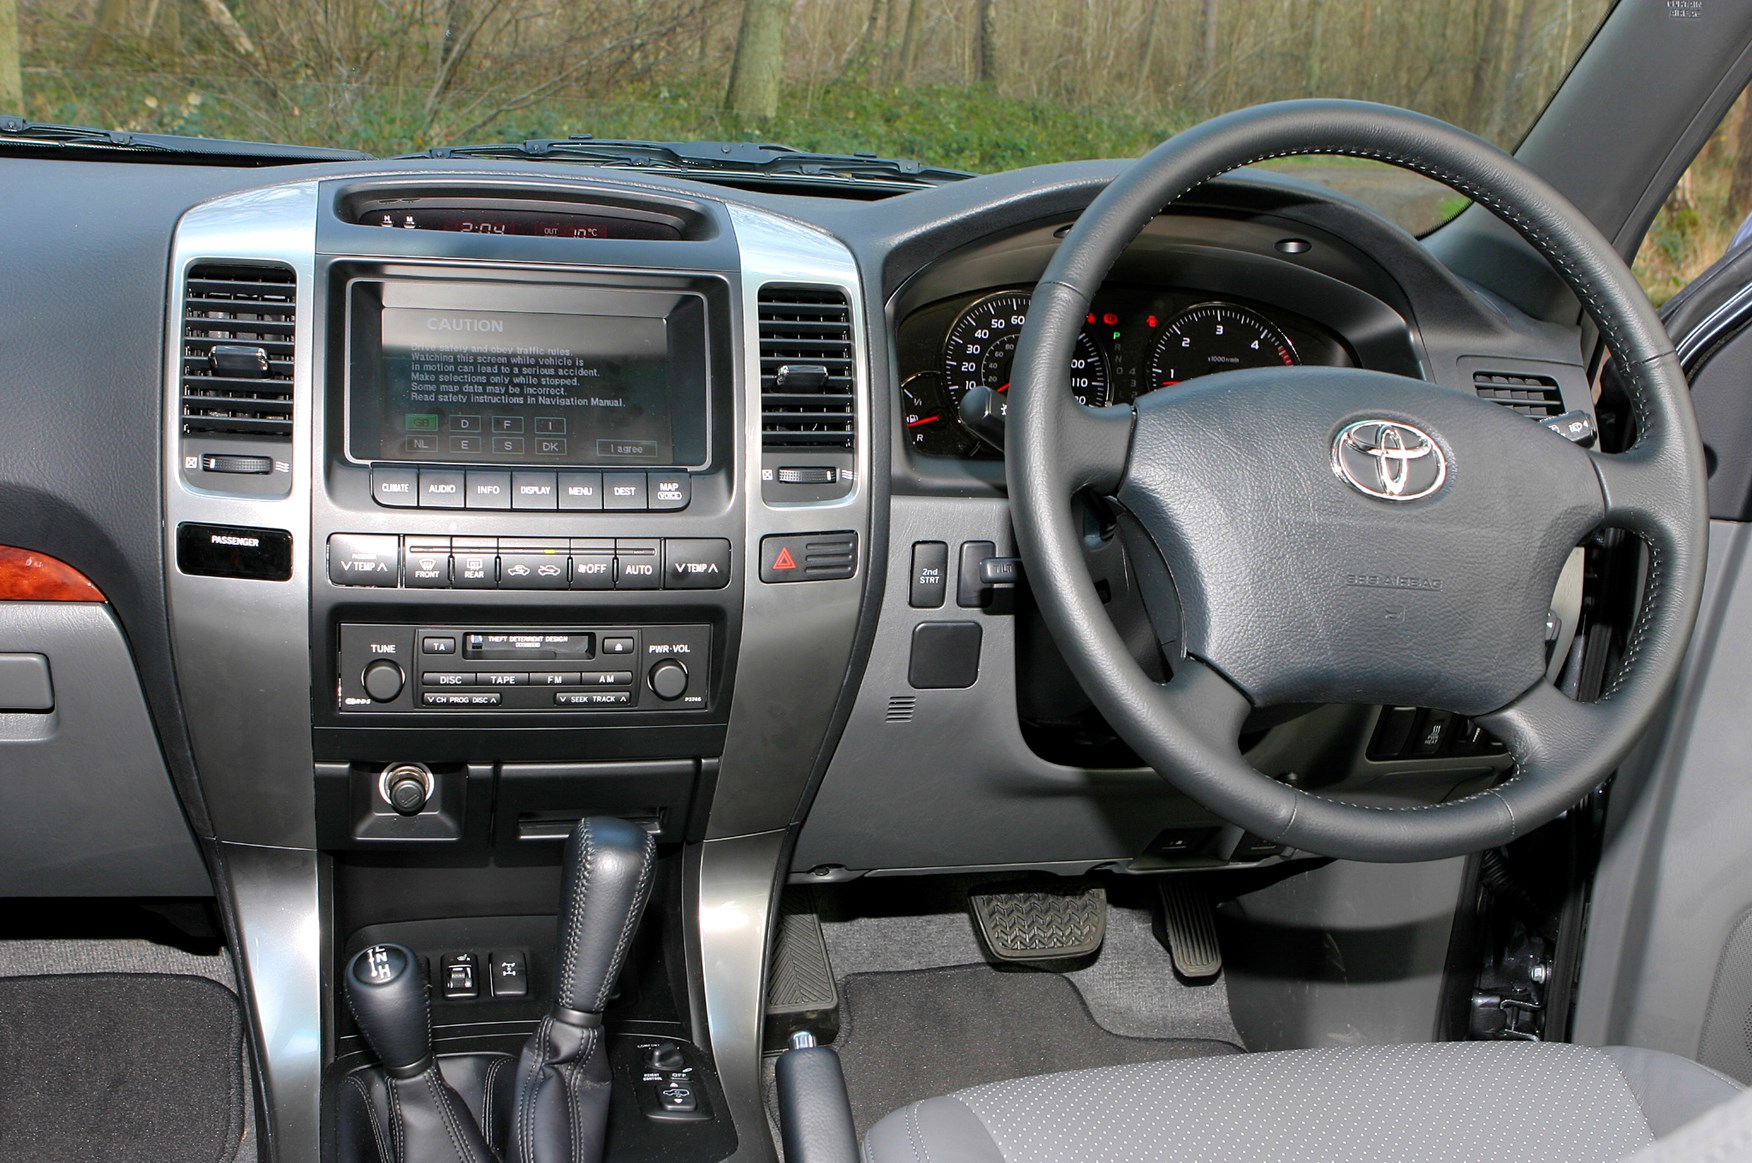 Used Toyota Land Cruiser Station Wagon 2003 2009 Review